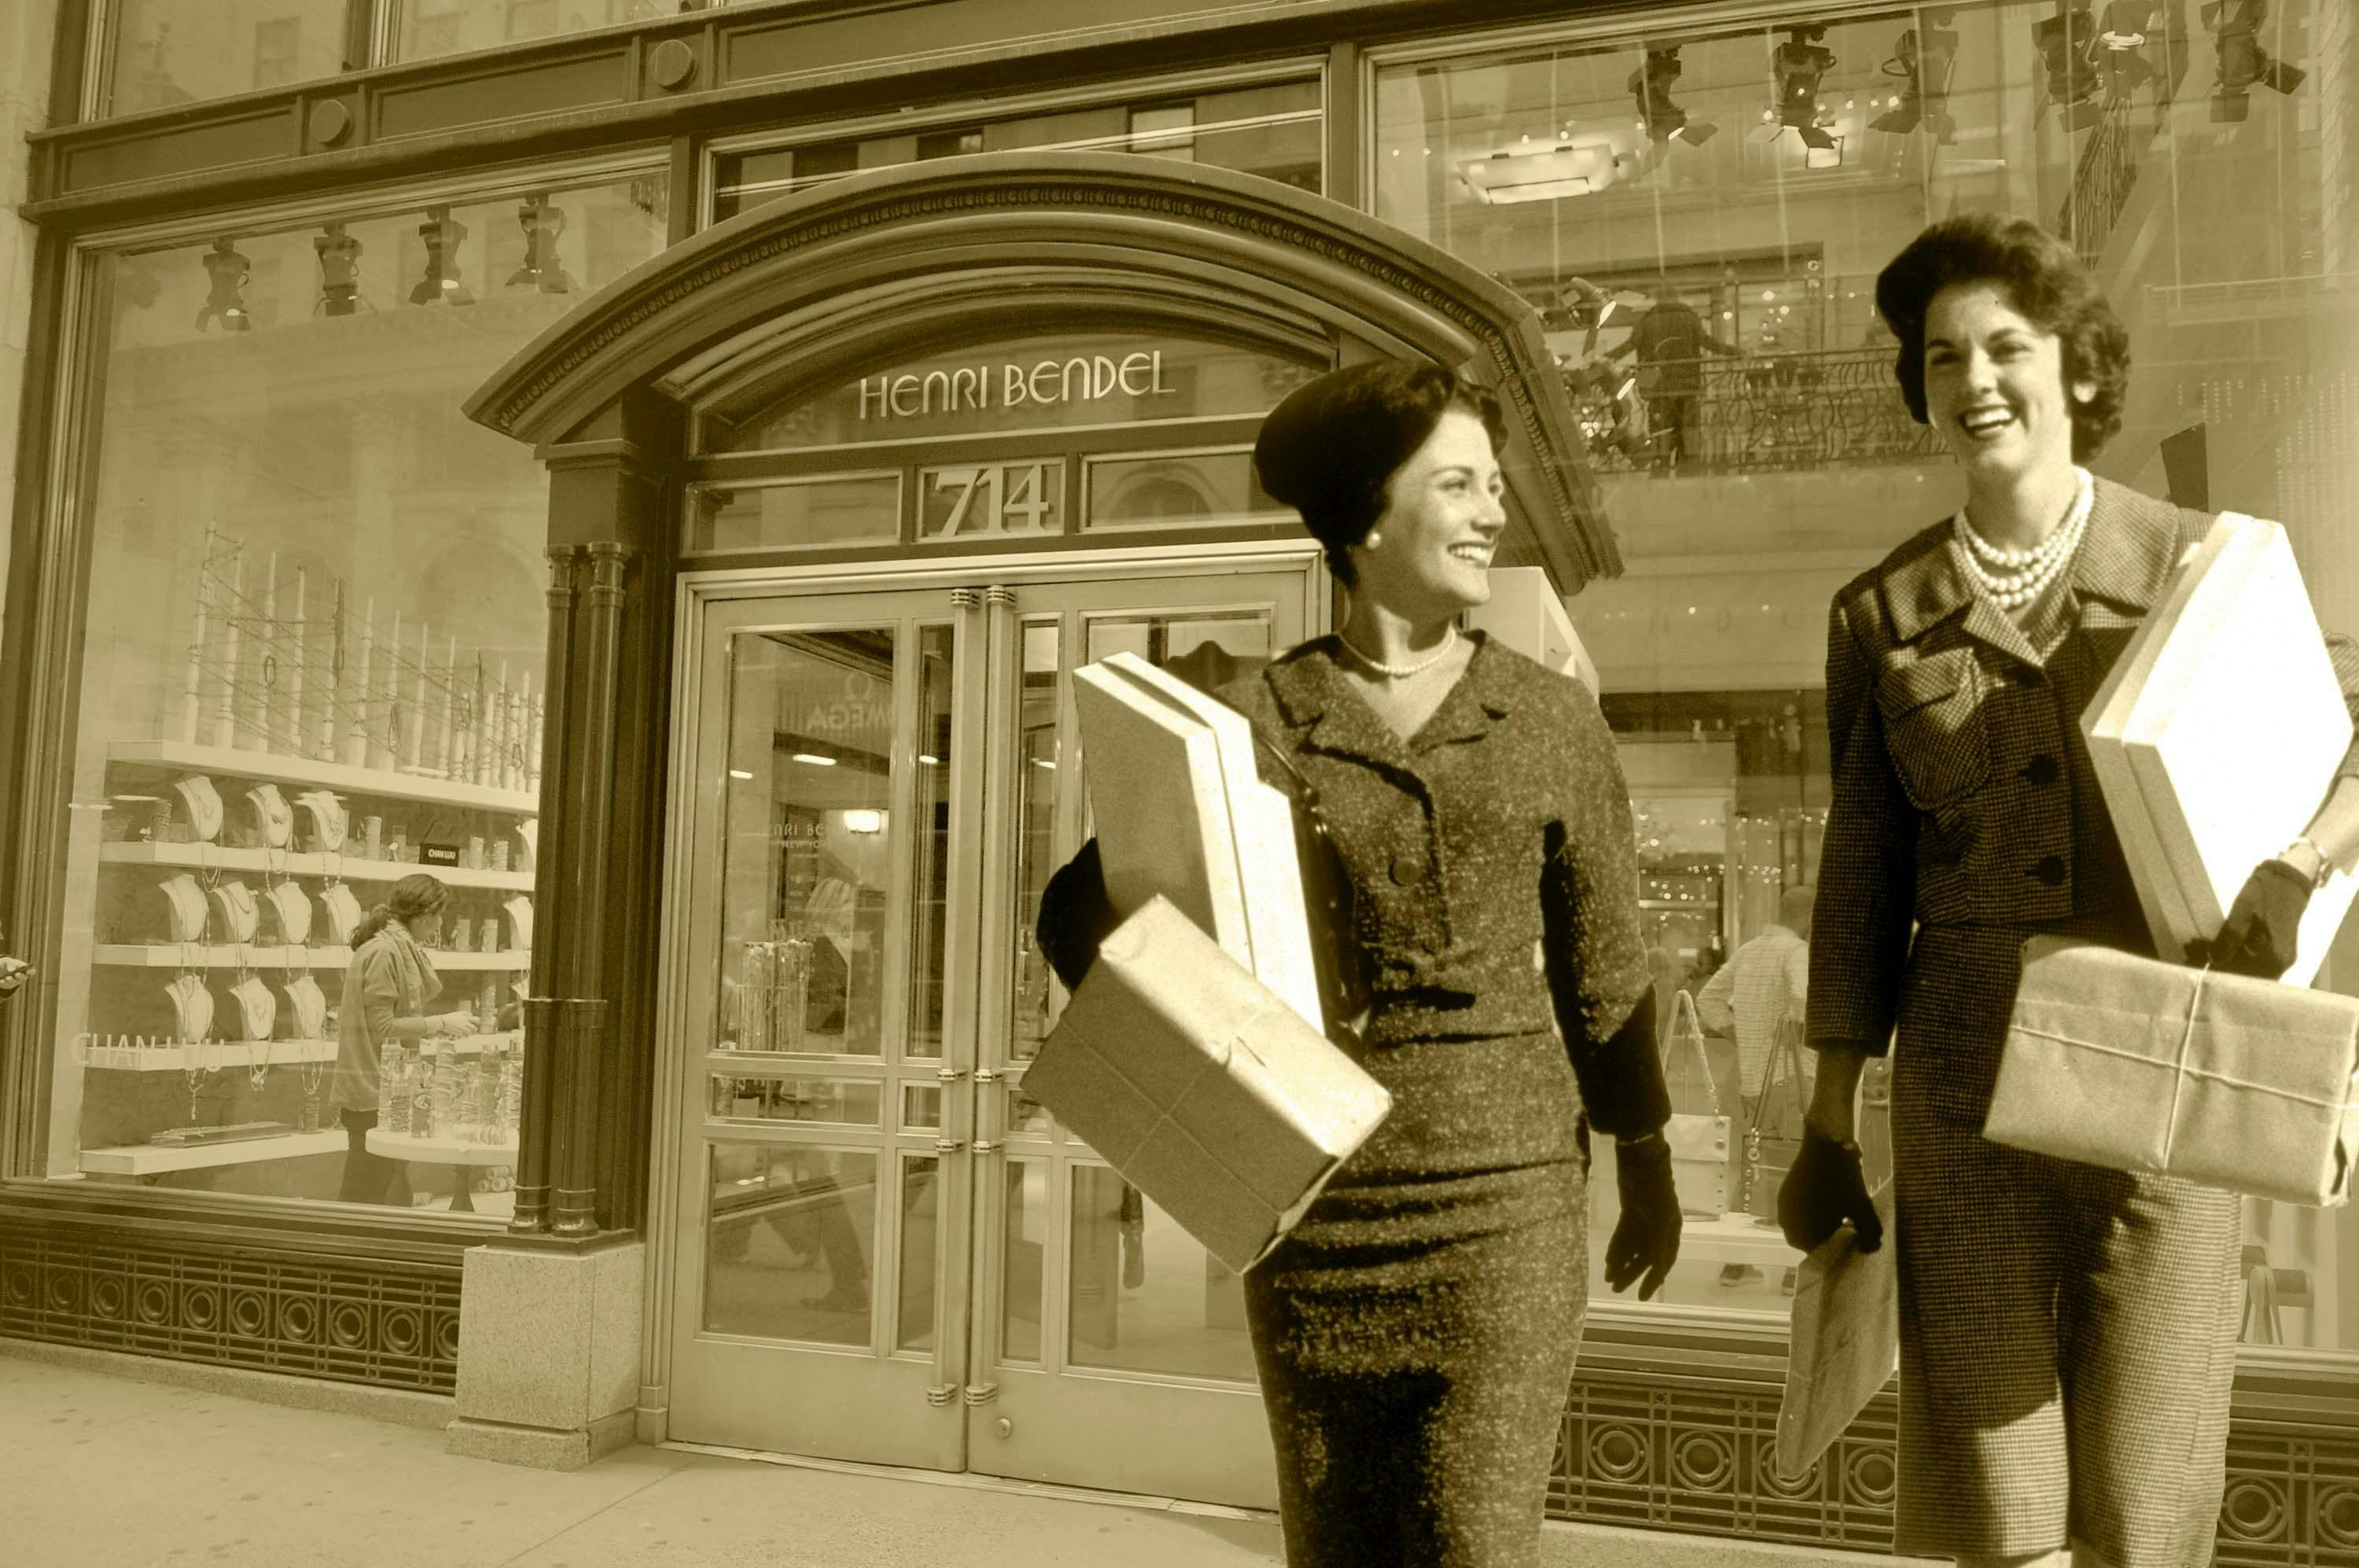 Look Back at Iconic NYC Department Store Henri Bendel in Photos – Bendel's  Vintage Photos